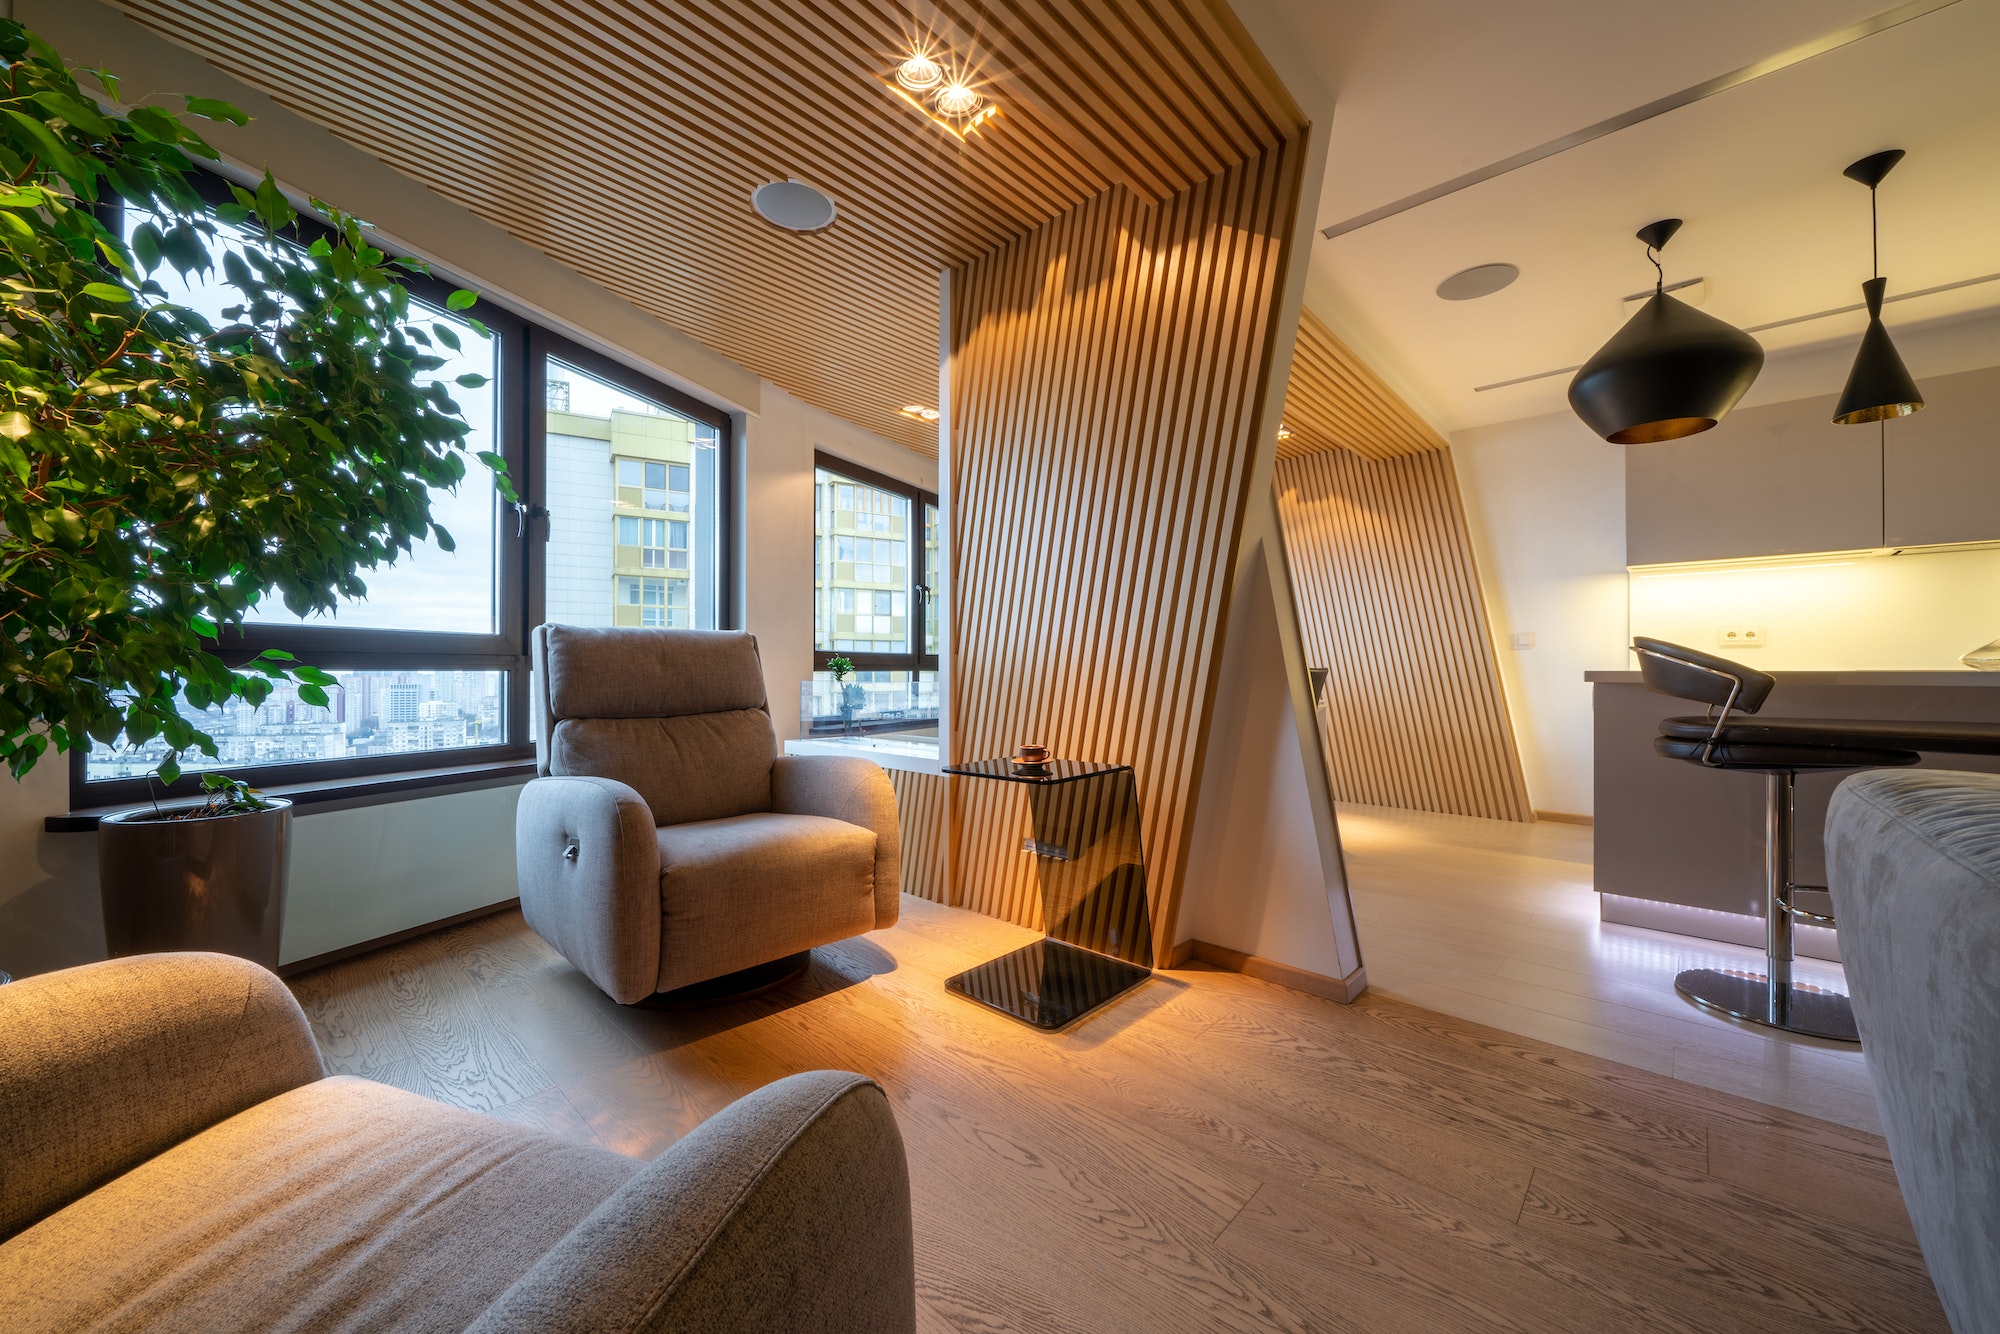 Luxury studio apartments in wooden colors with soft armchairs